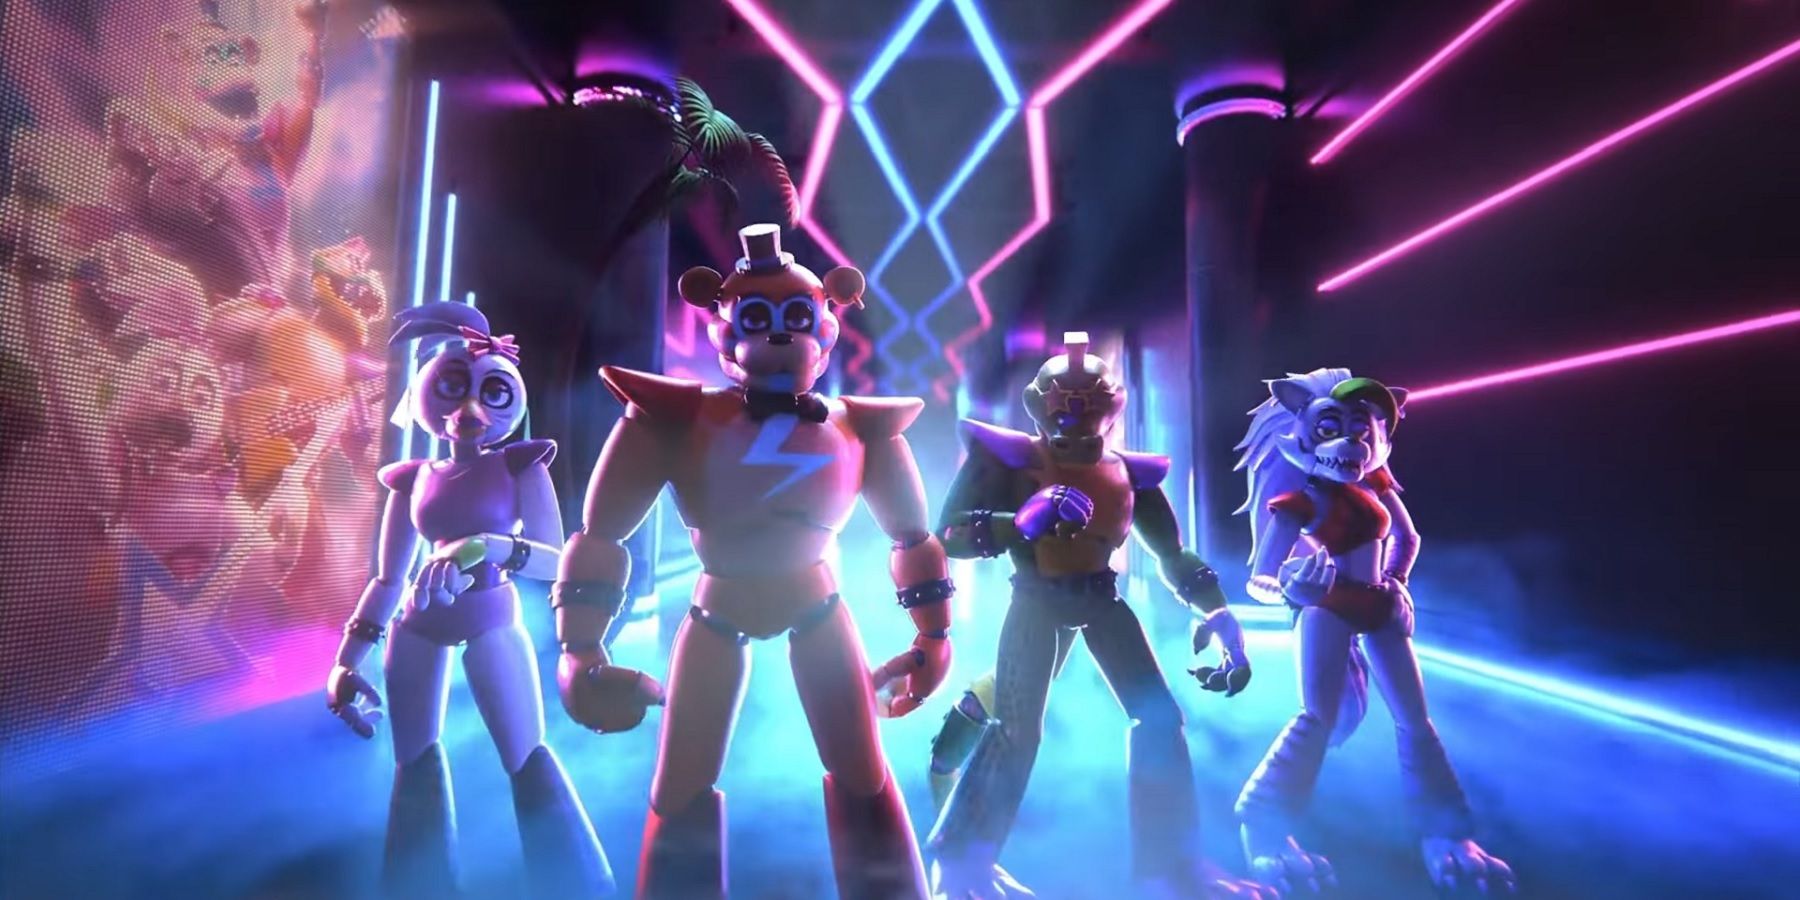 Screenshot from the Five Nights at Freddys: Security Breach trailer showing all the characters posing as a band.